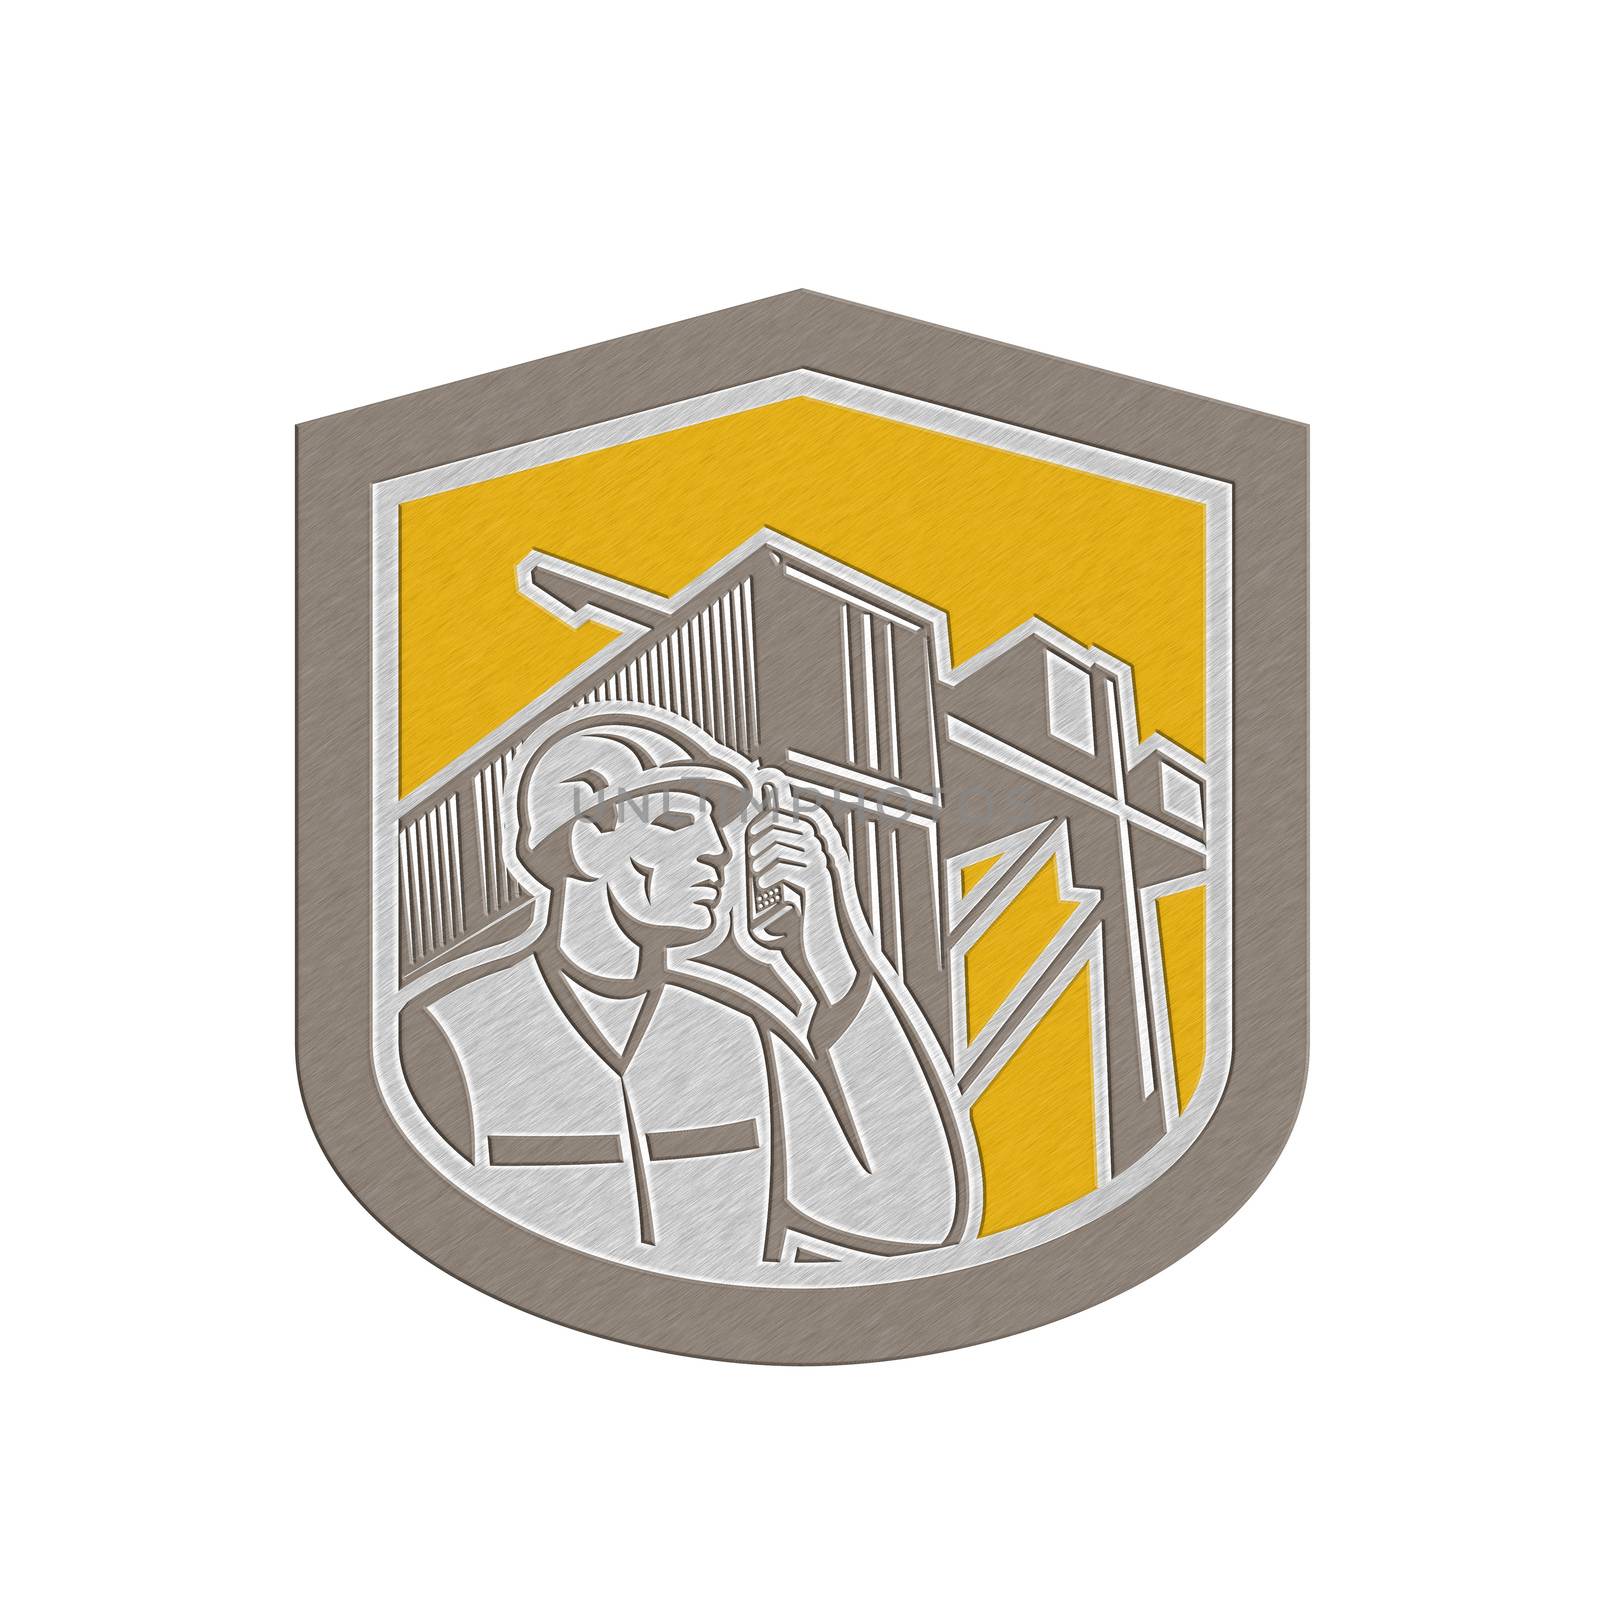 Metallic styled illustration of a dock worker on phone calling with shipping containers in the background set inside shield crest done in retro style.